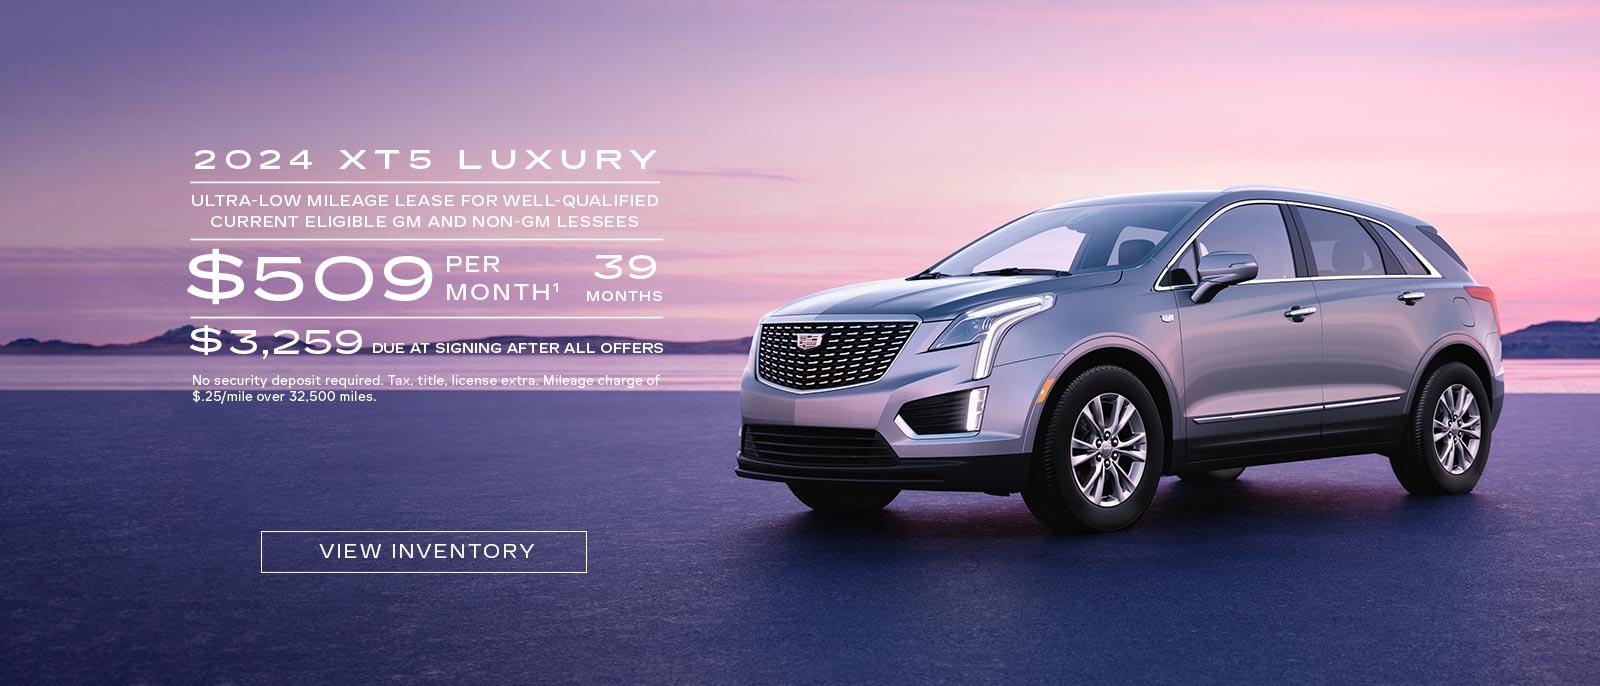 2024 XT5 Luxury. Ultra-low mileage lease for well-qualified current eligible Gm and Non-GM Lessees. $509 per month. 39 months. $3,259 due at signing after all offers.